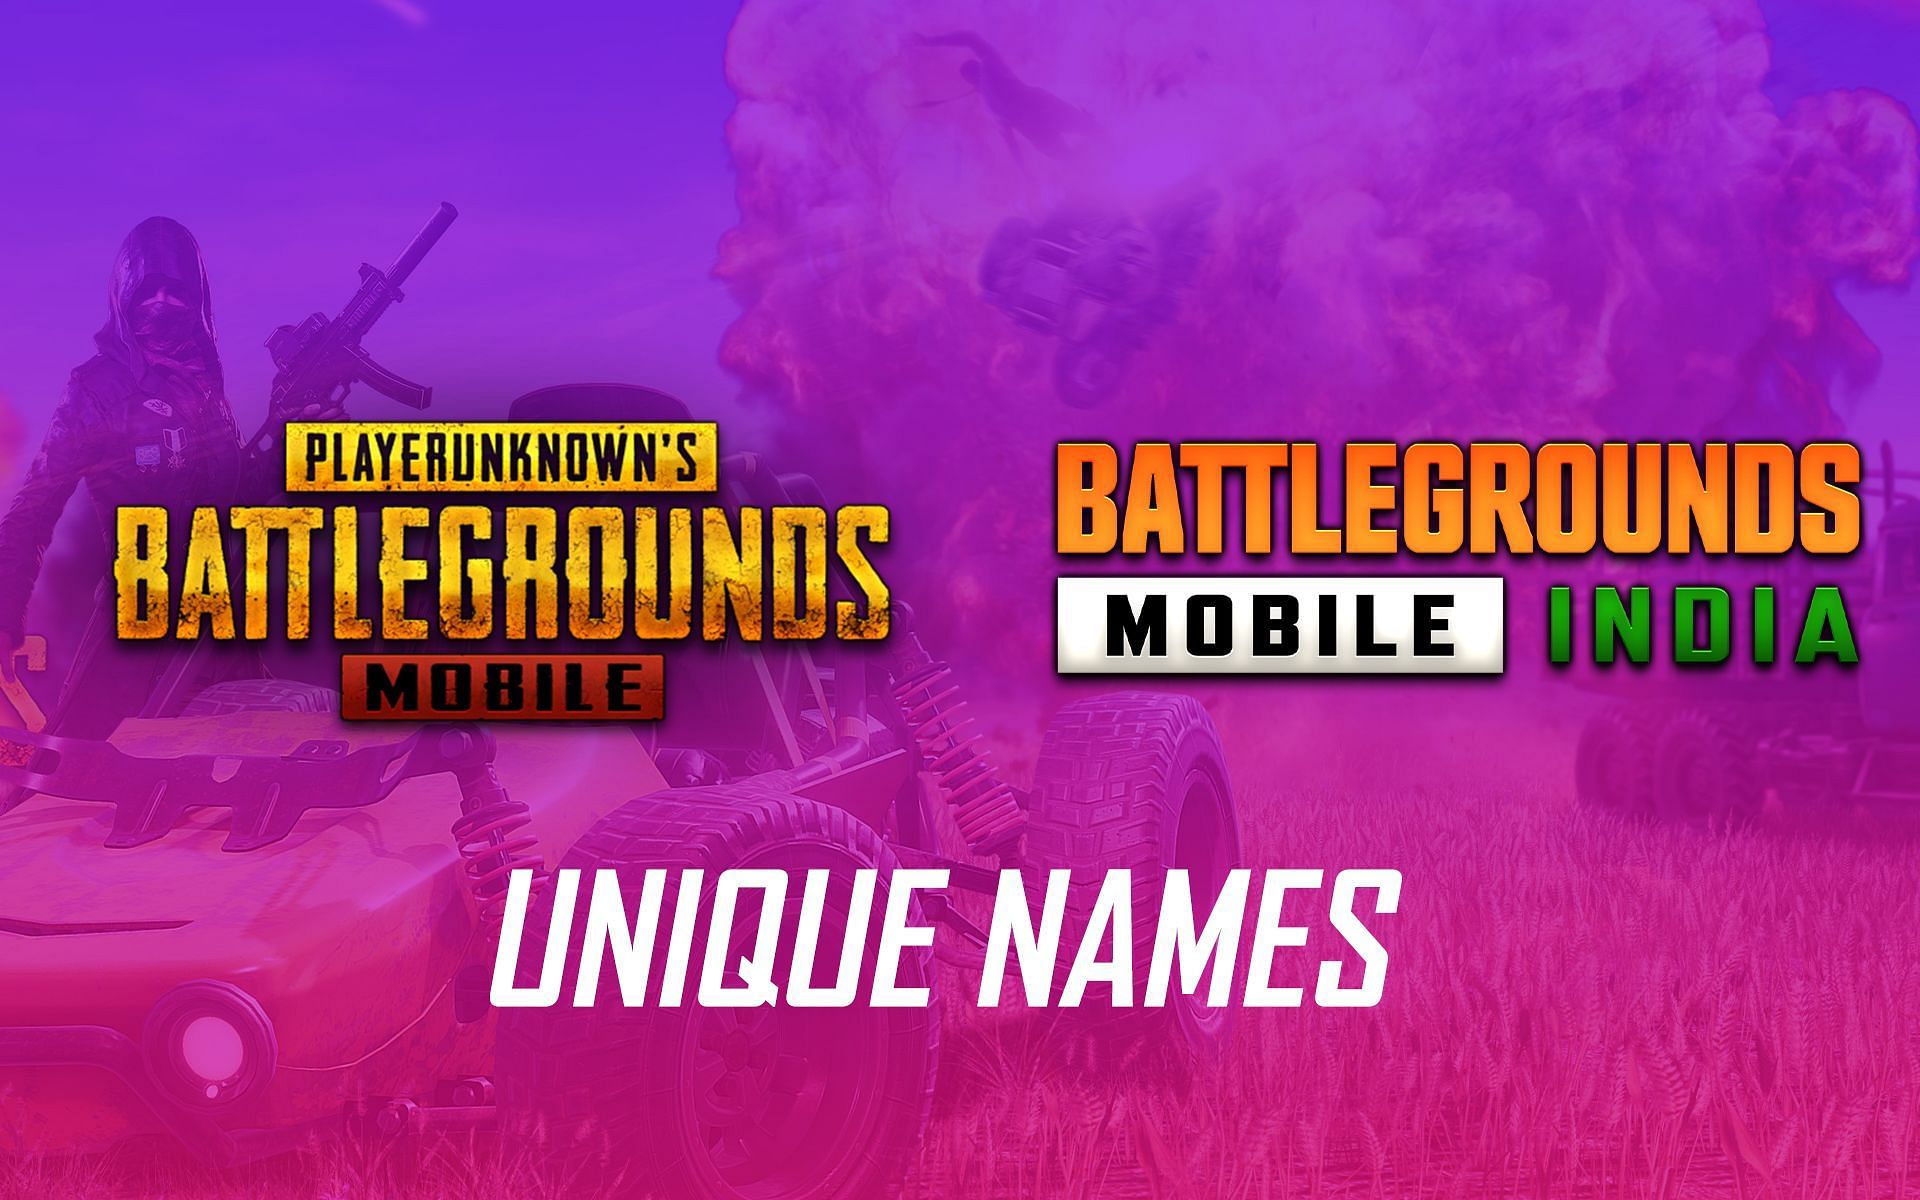 Unique and creative in-game monikers for PUBG Mobile and BGMI players (Image via Sportskeeda)